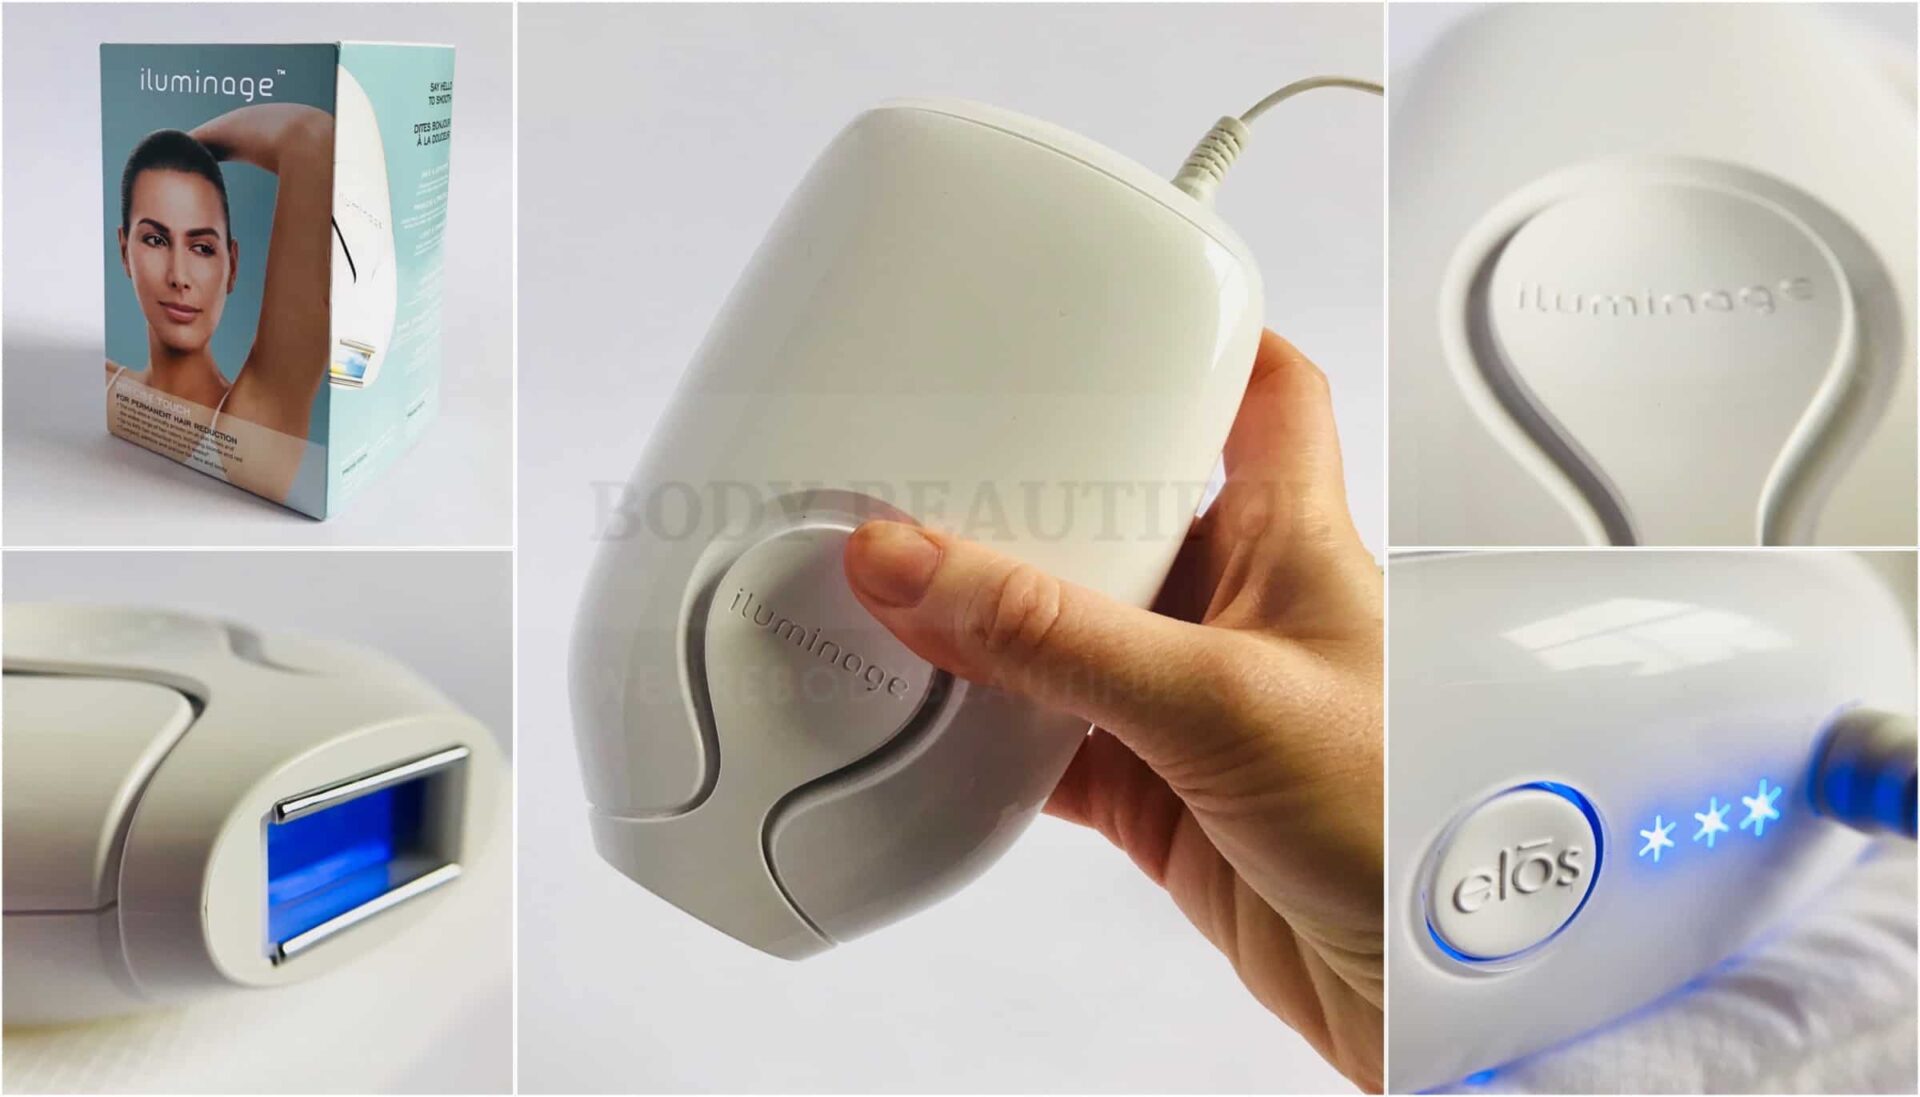 WeAreBodyBeautiful.com's tried & tested review of the Iluminage Precise Touch home IPL